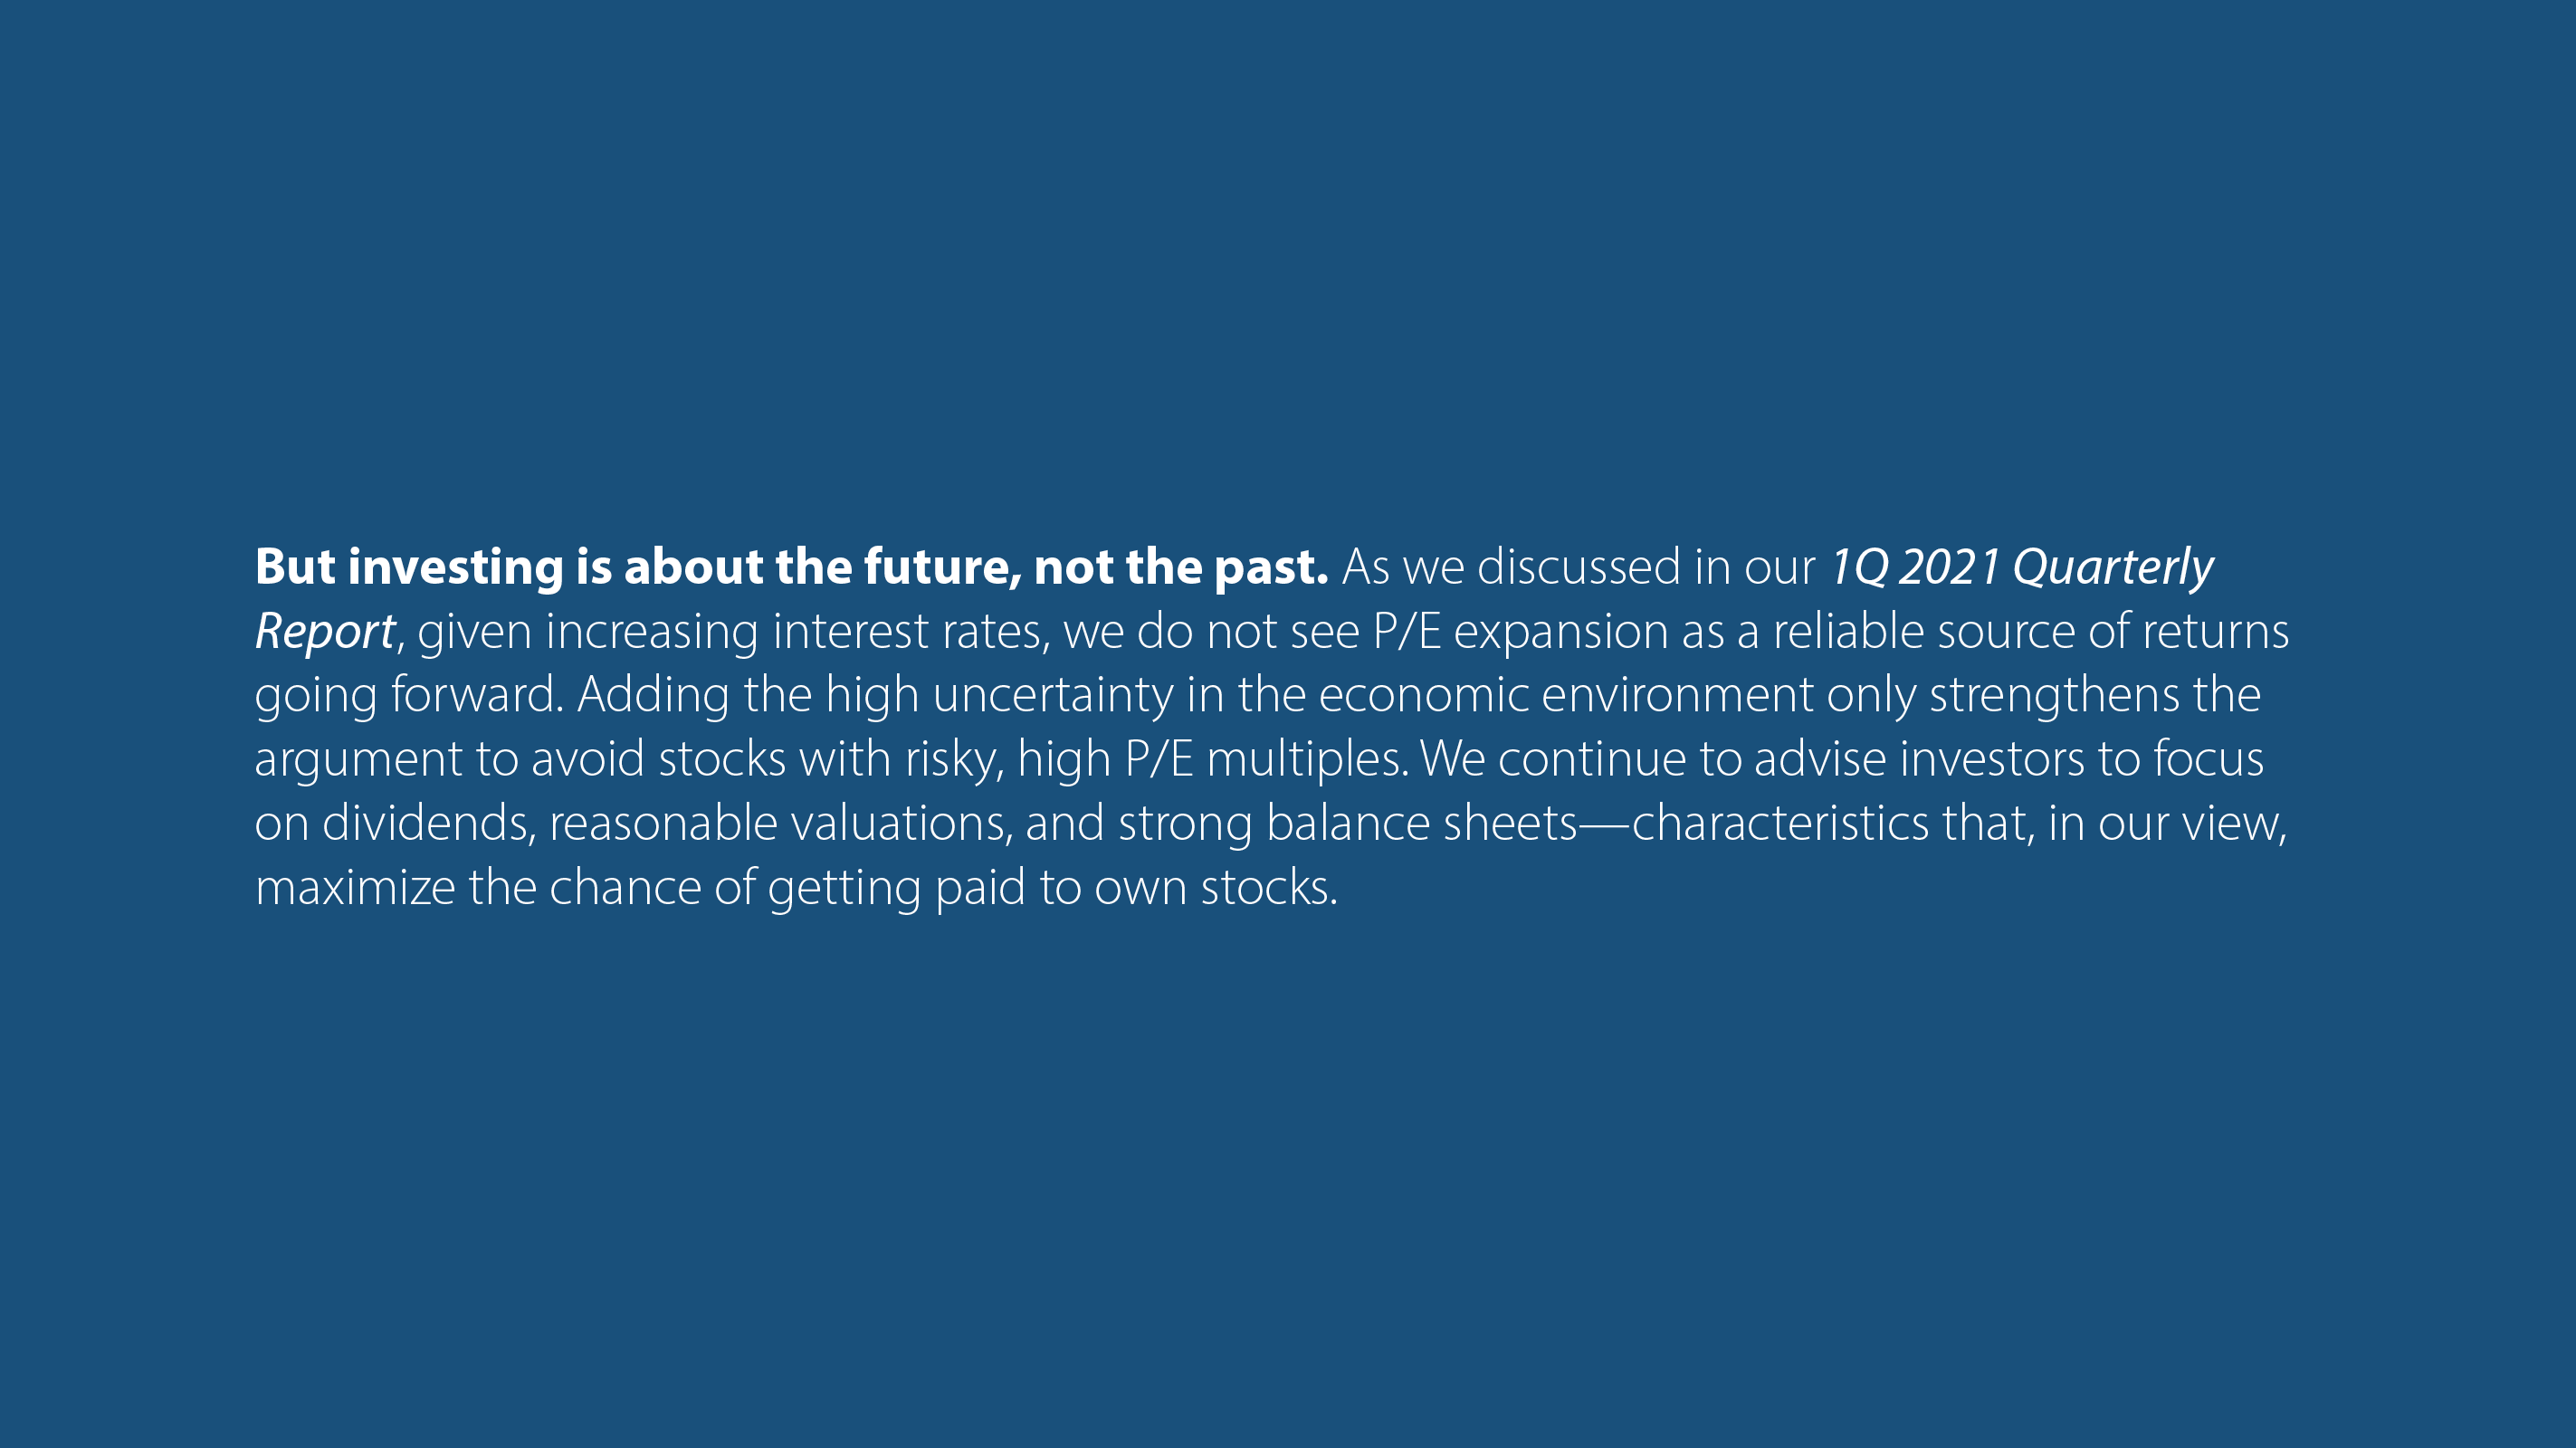 But investing is about the future, not the past